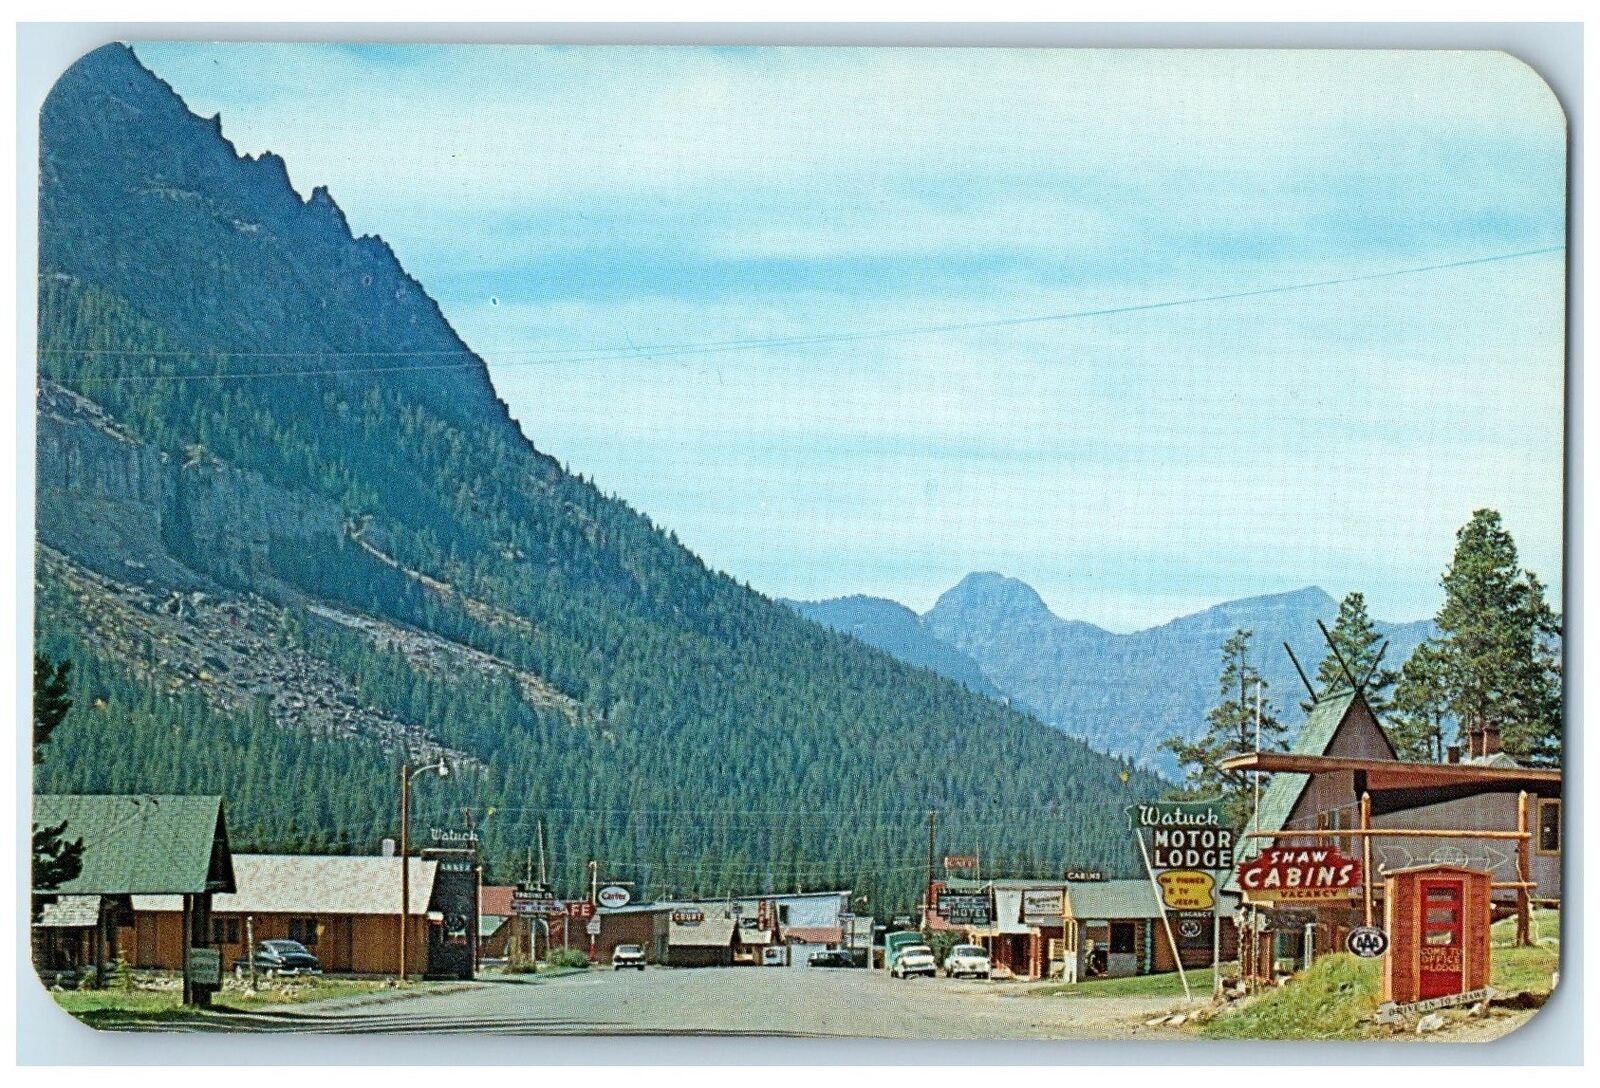 c1960's Main Street Lodges And Cabins Cooke City Minnesota MN Unposted Postcard